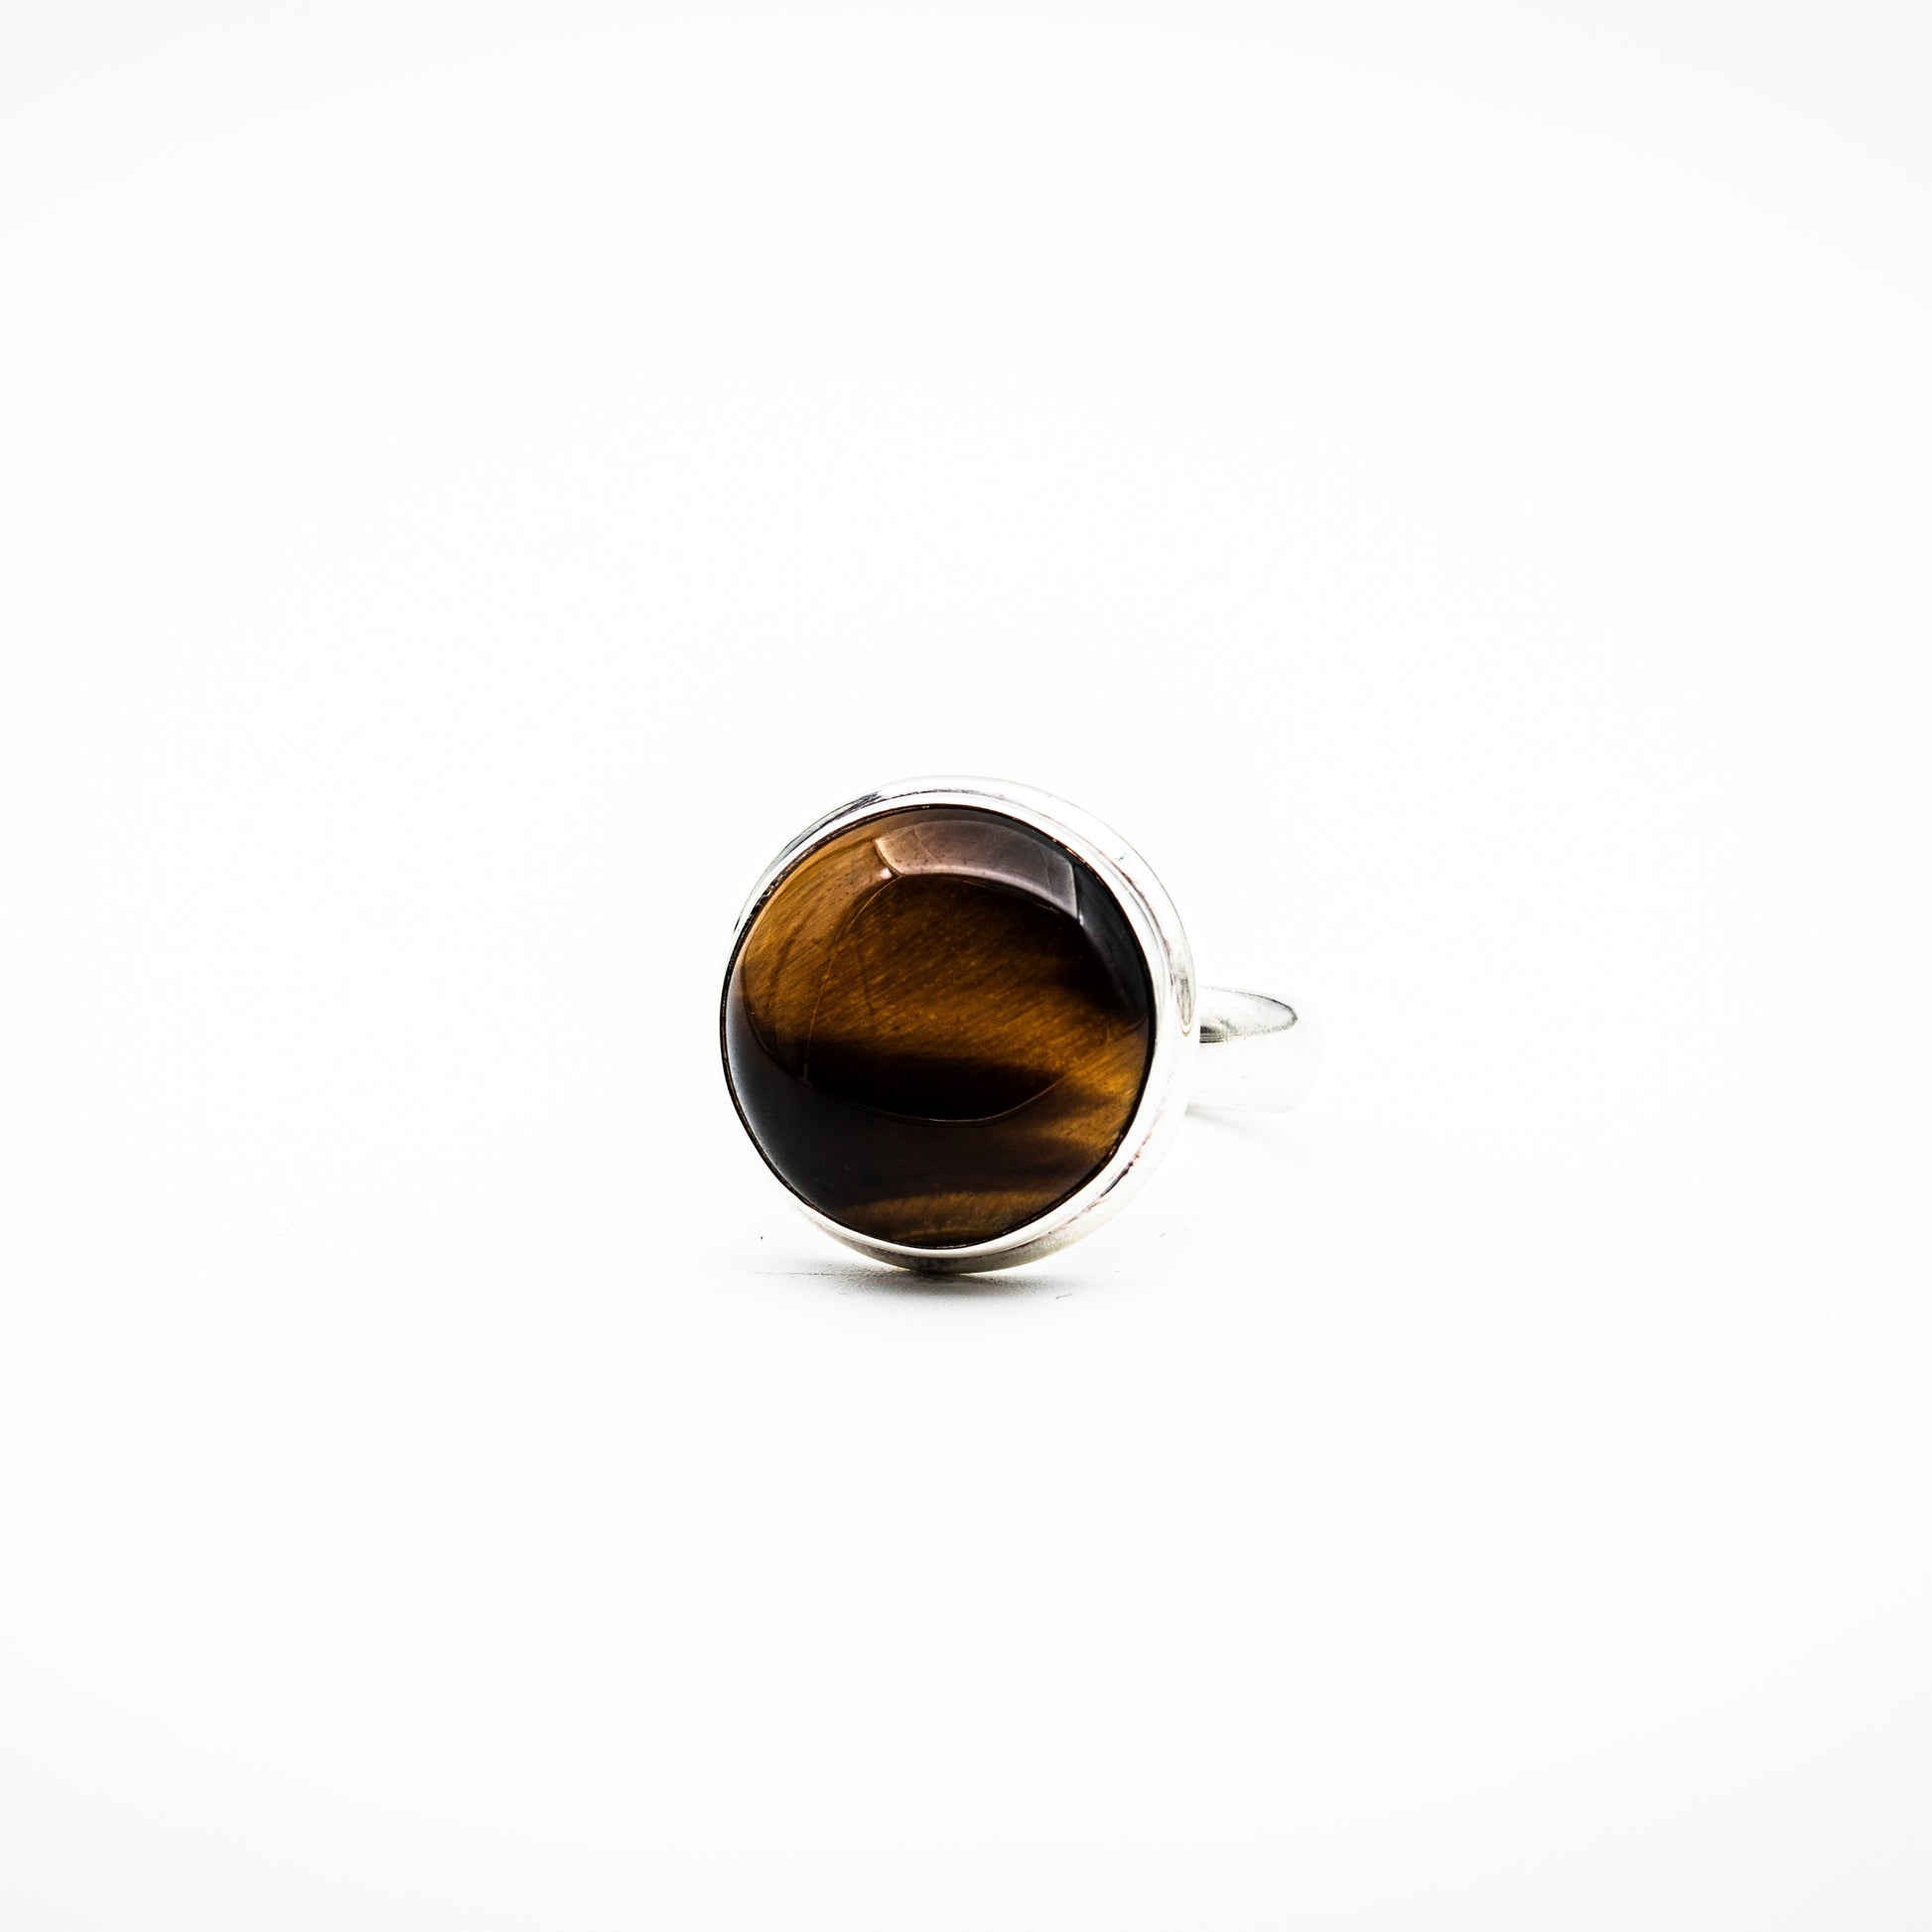 Yellow Tiger Eye on the white surface